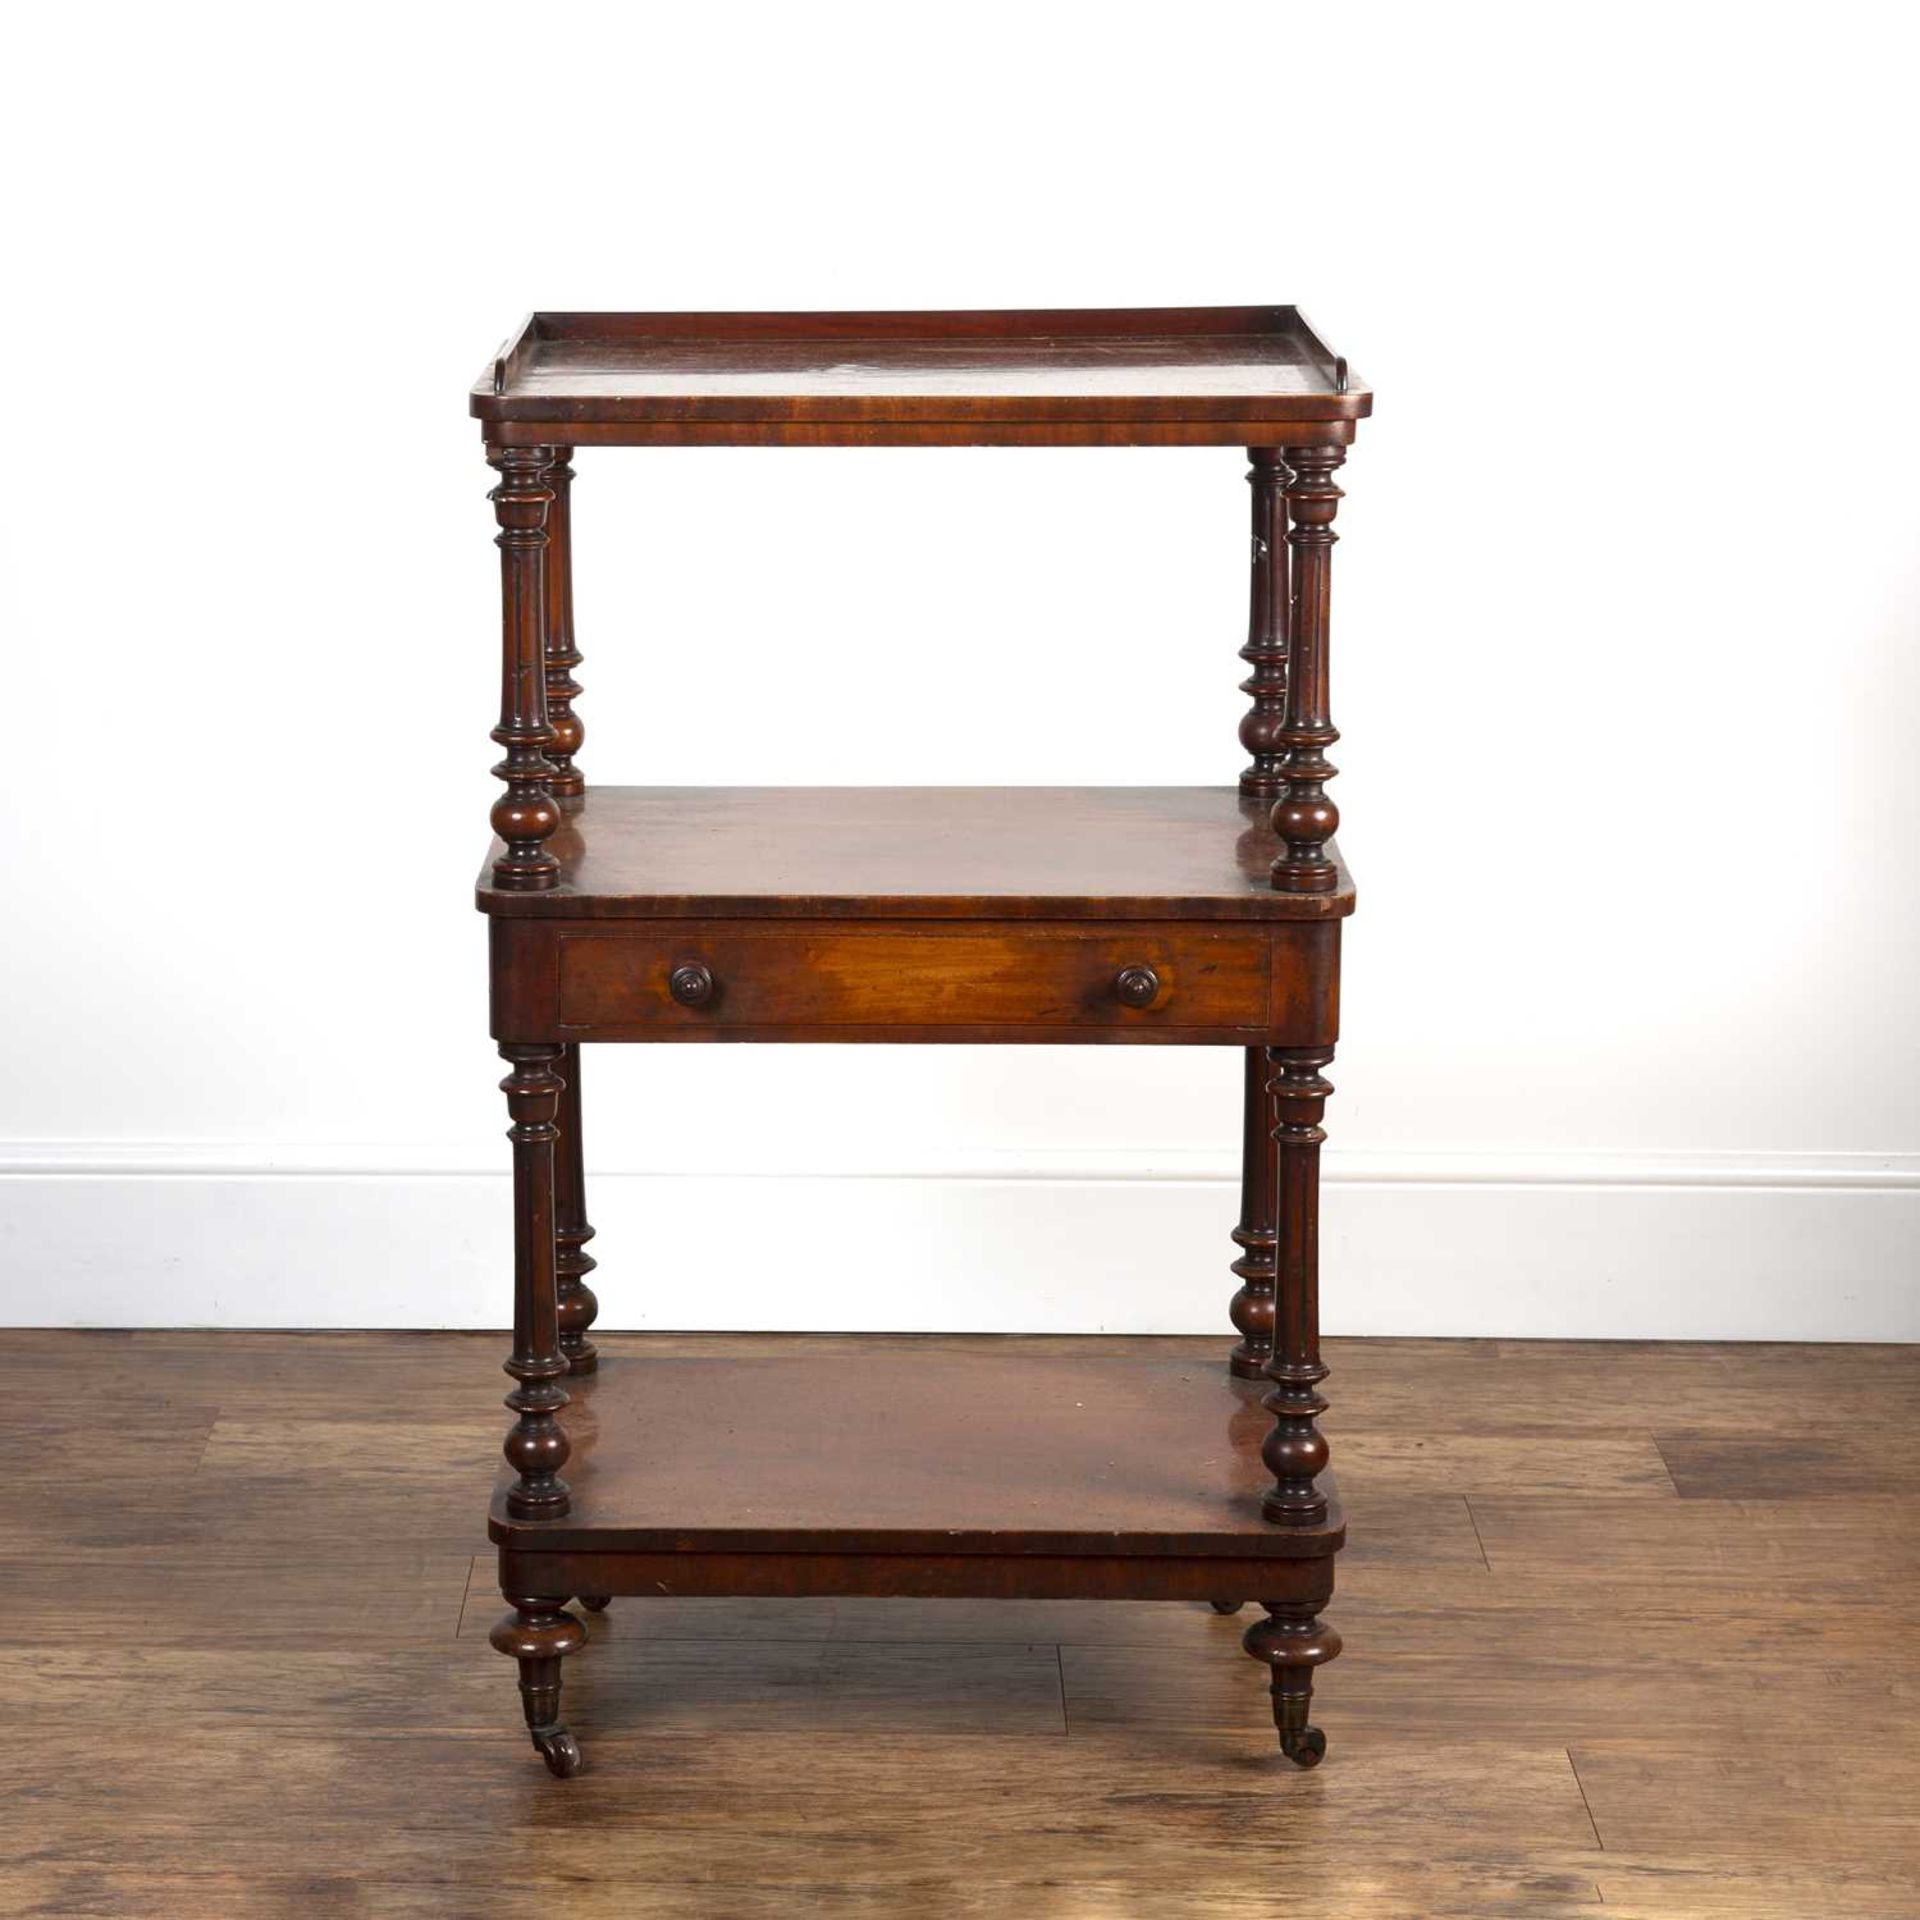 Mahogany three tier buffet stand 19th Century, with galleried top and single fitted drawer, standing - Image 2 of 6